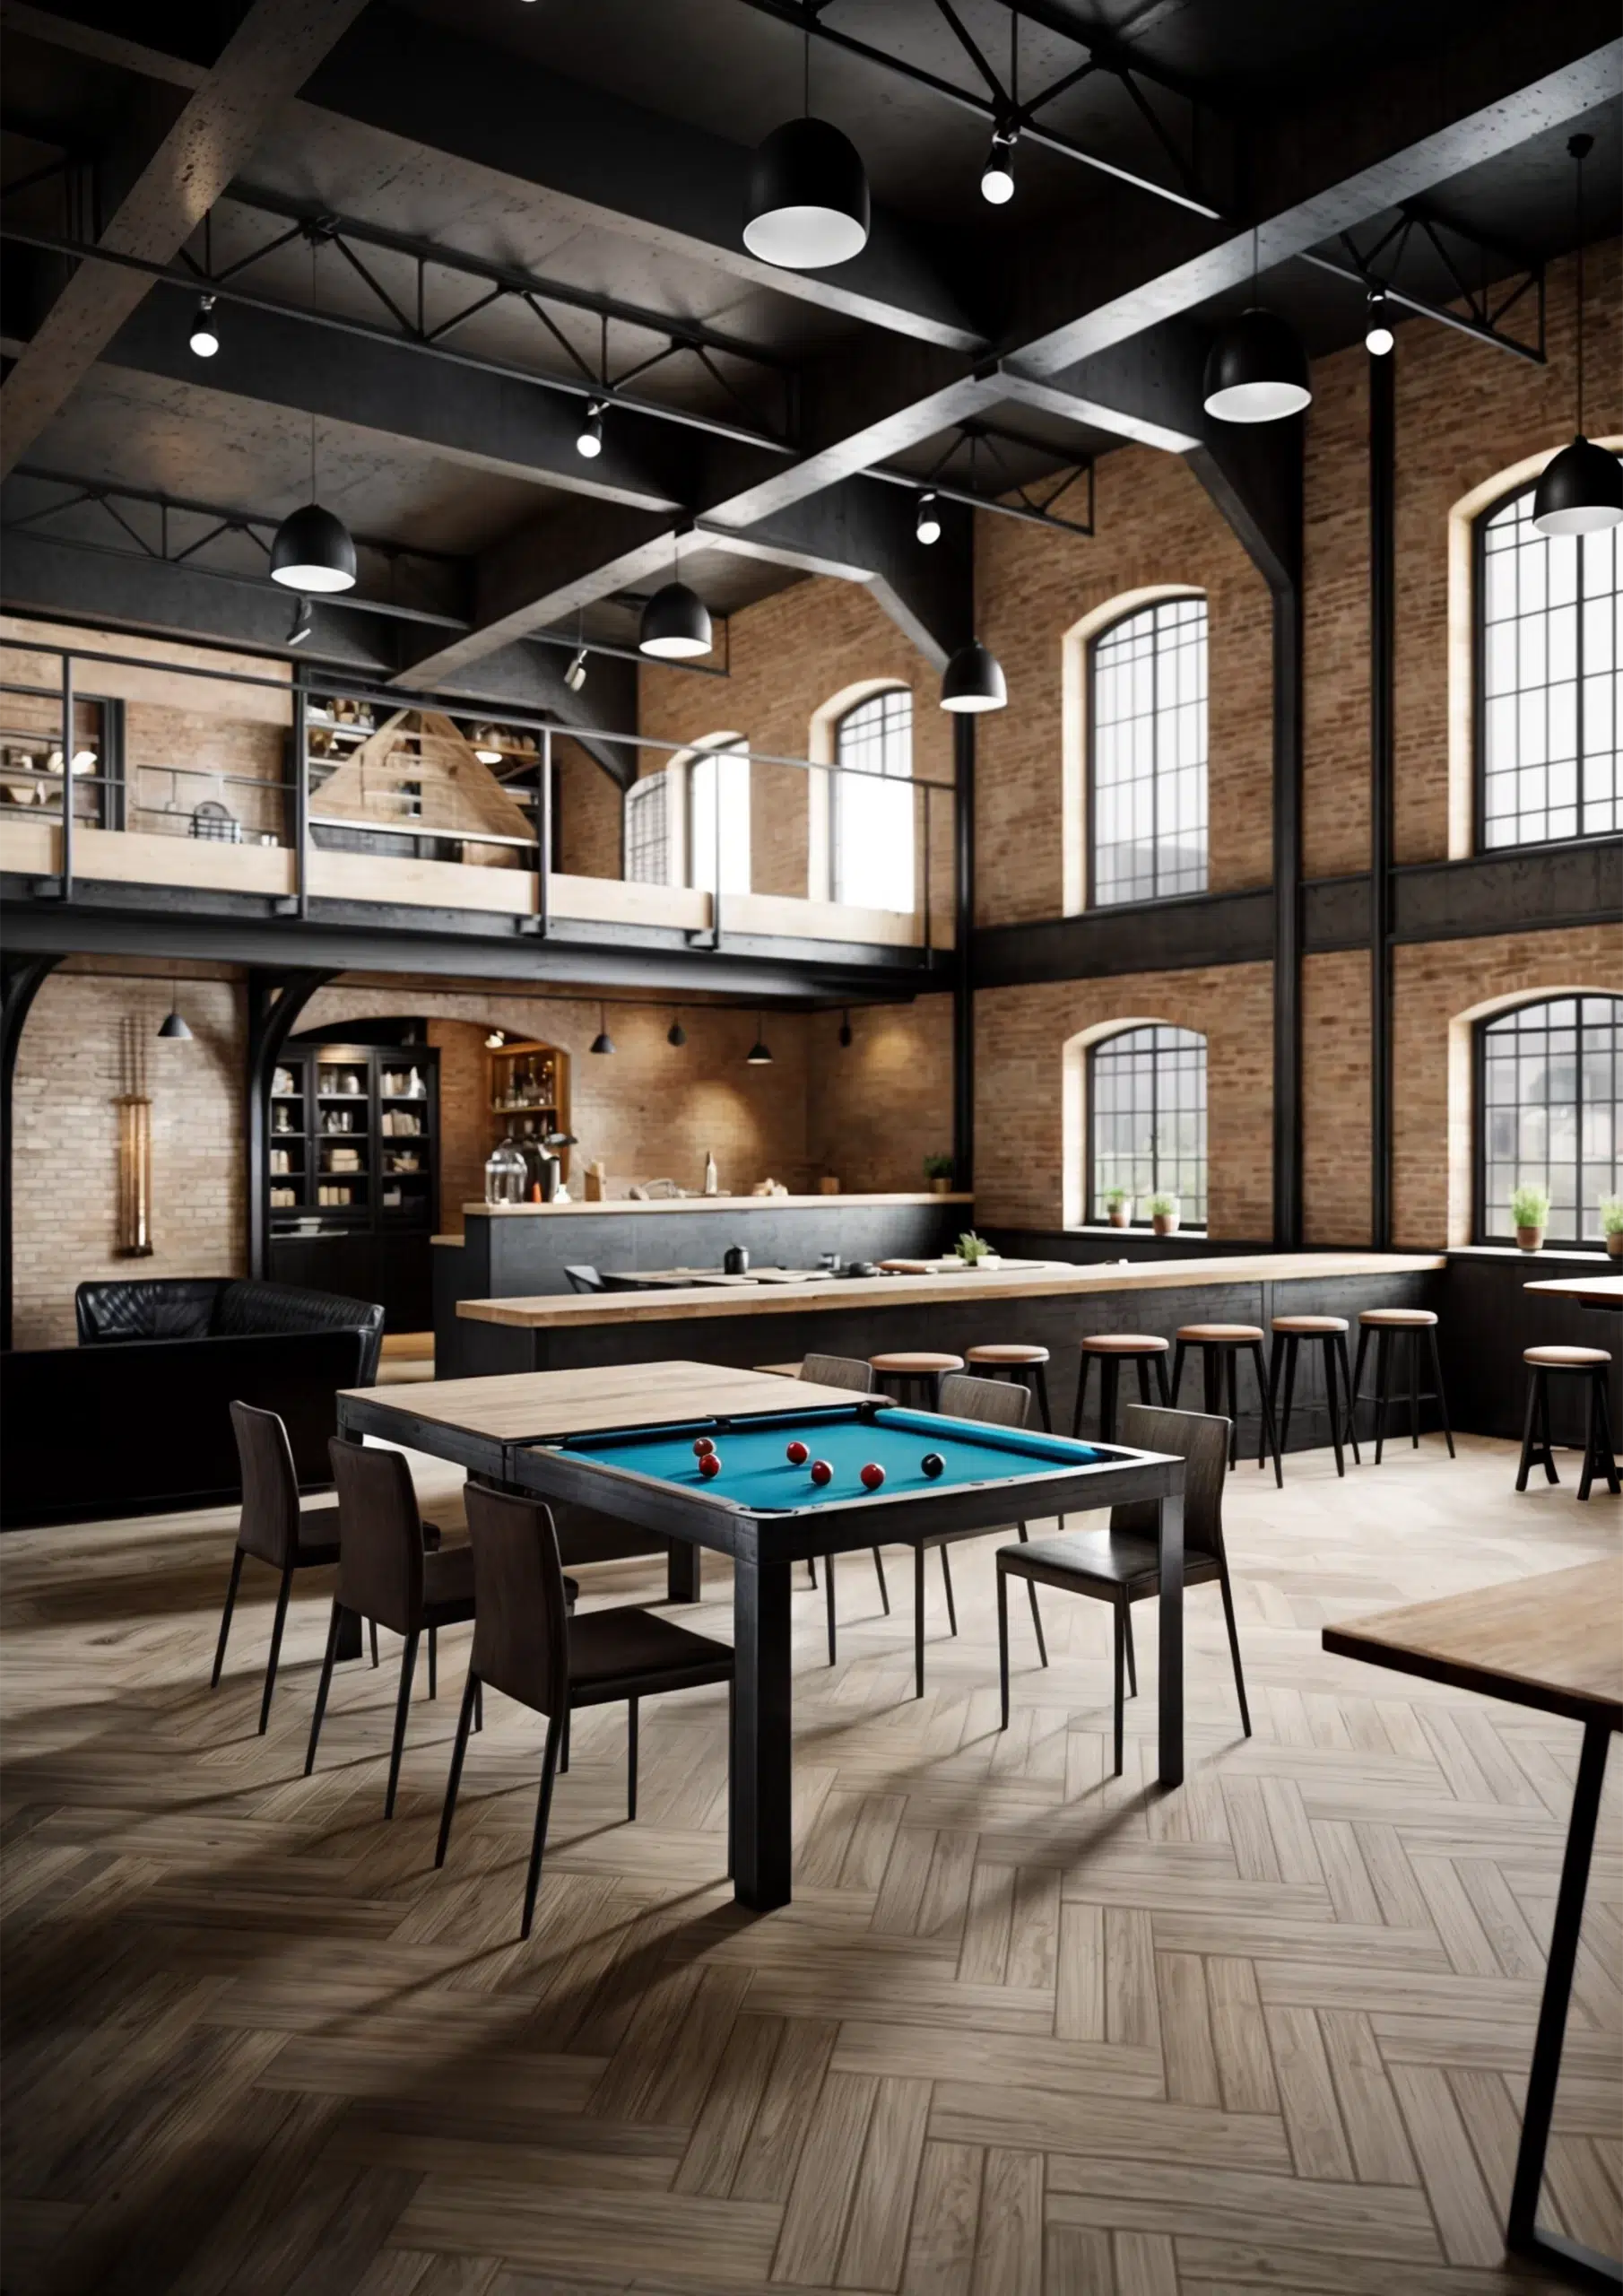 3D visualization of a billiard table in a rustic room with wooden beams and a cozy seating area, designed by CGVIZ Studio